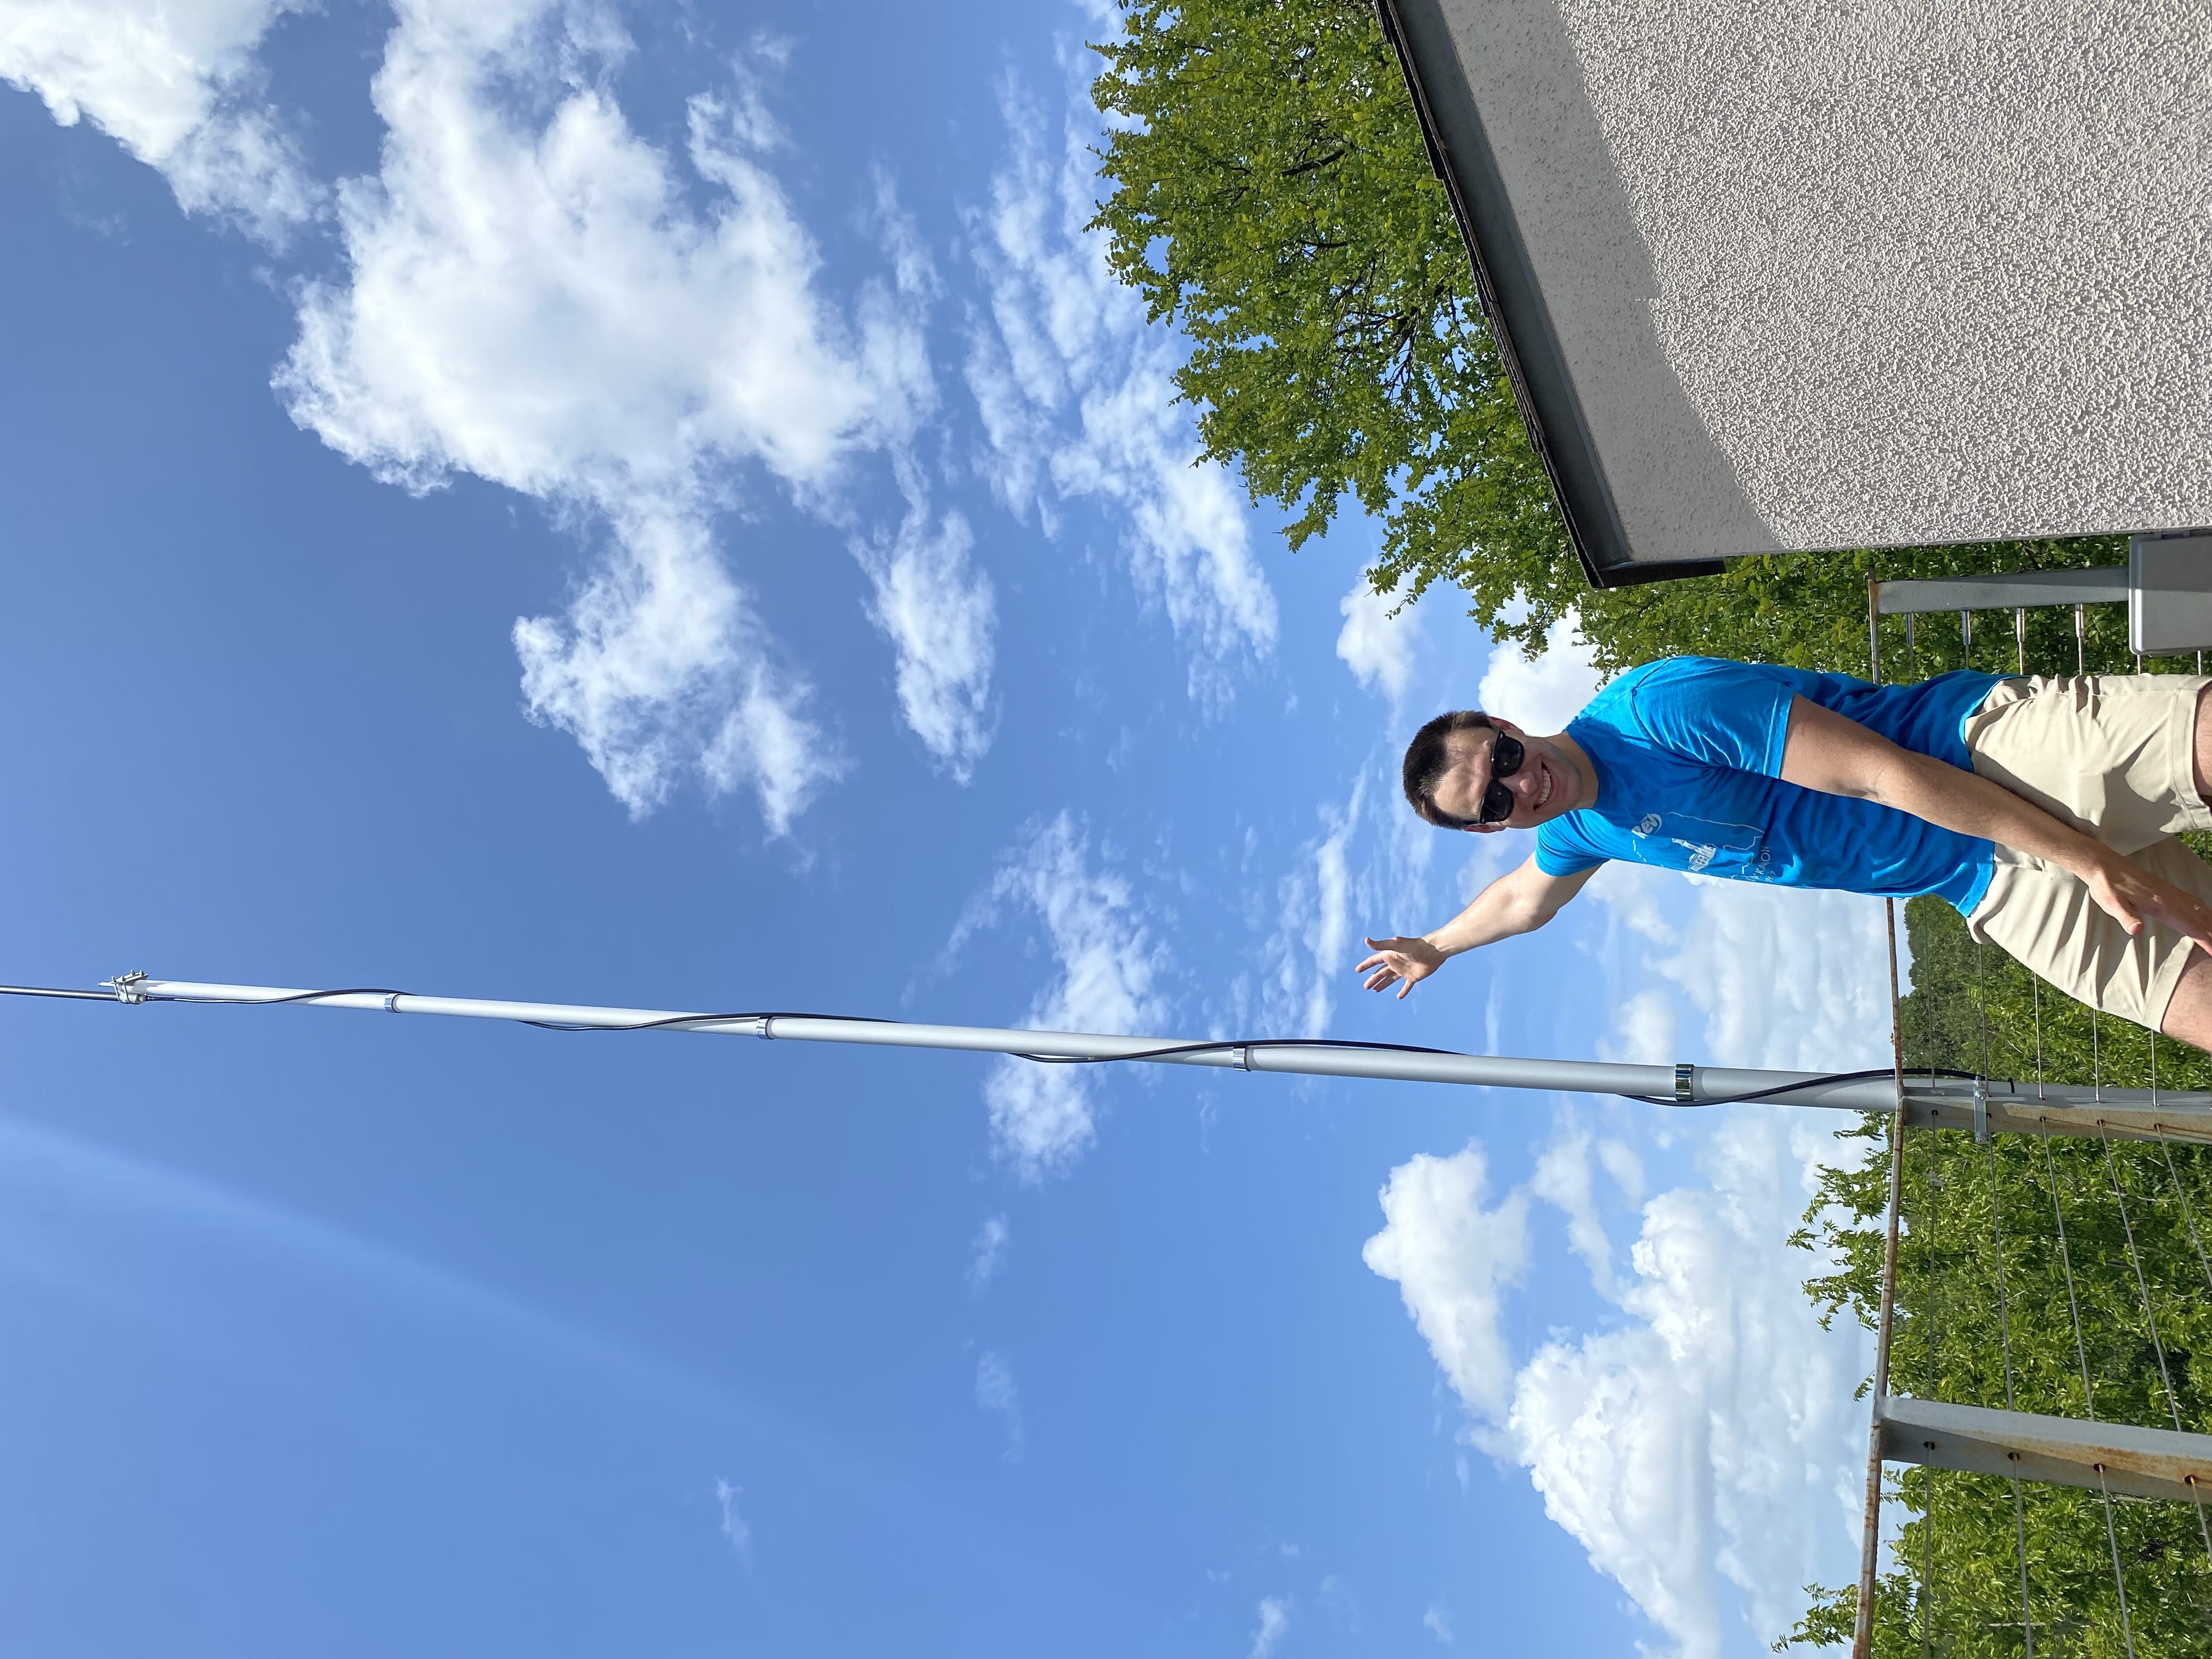 Me, standing next to a tall antenna